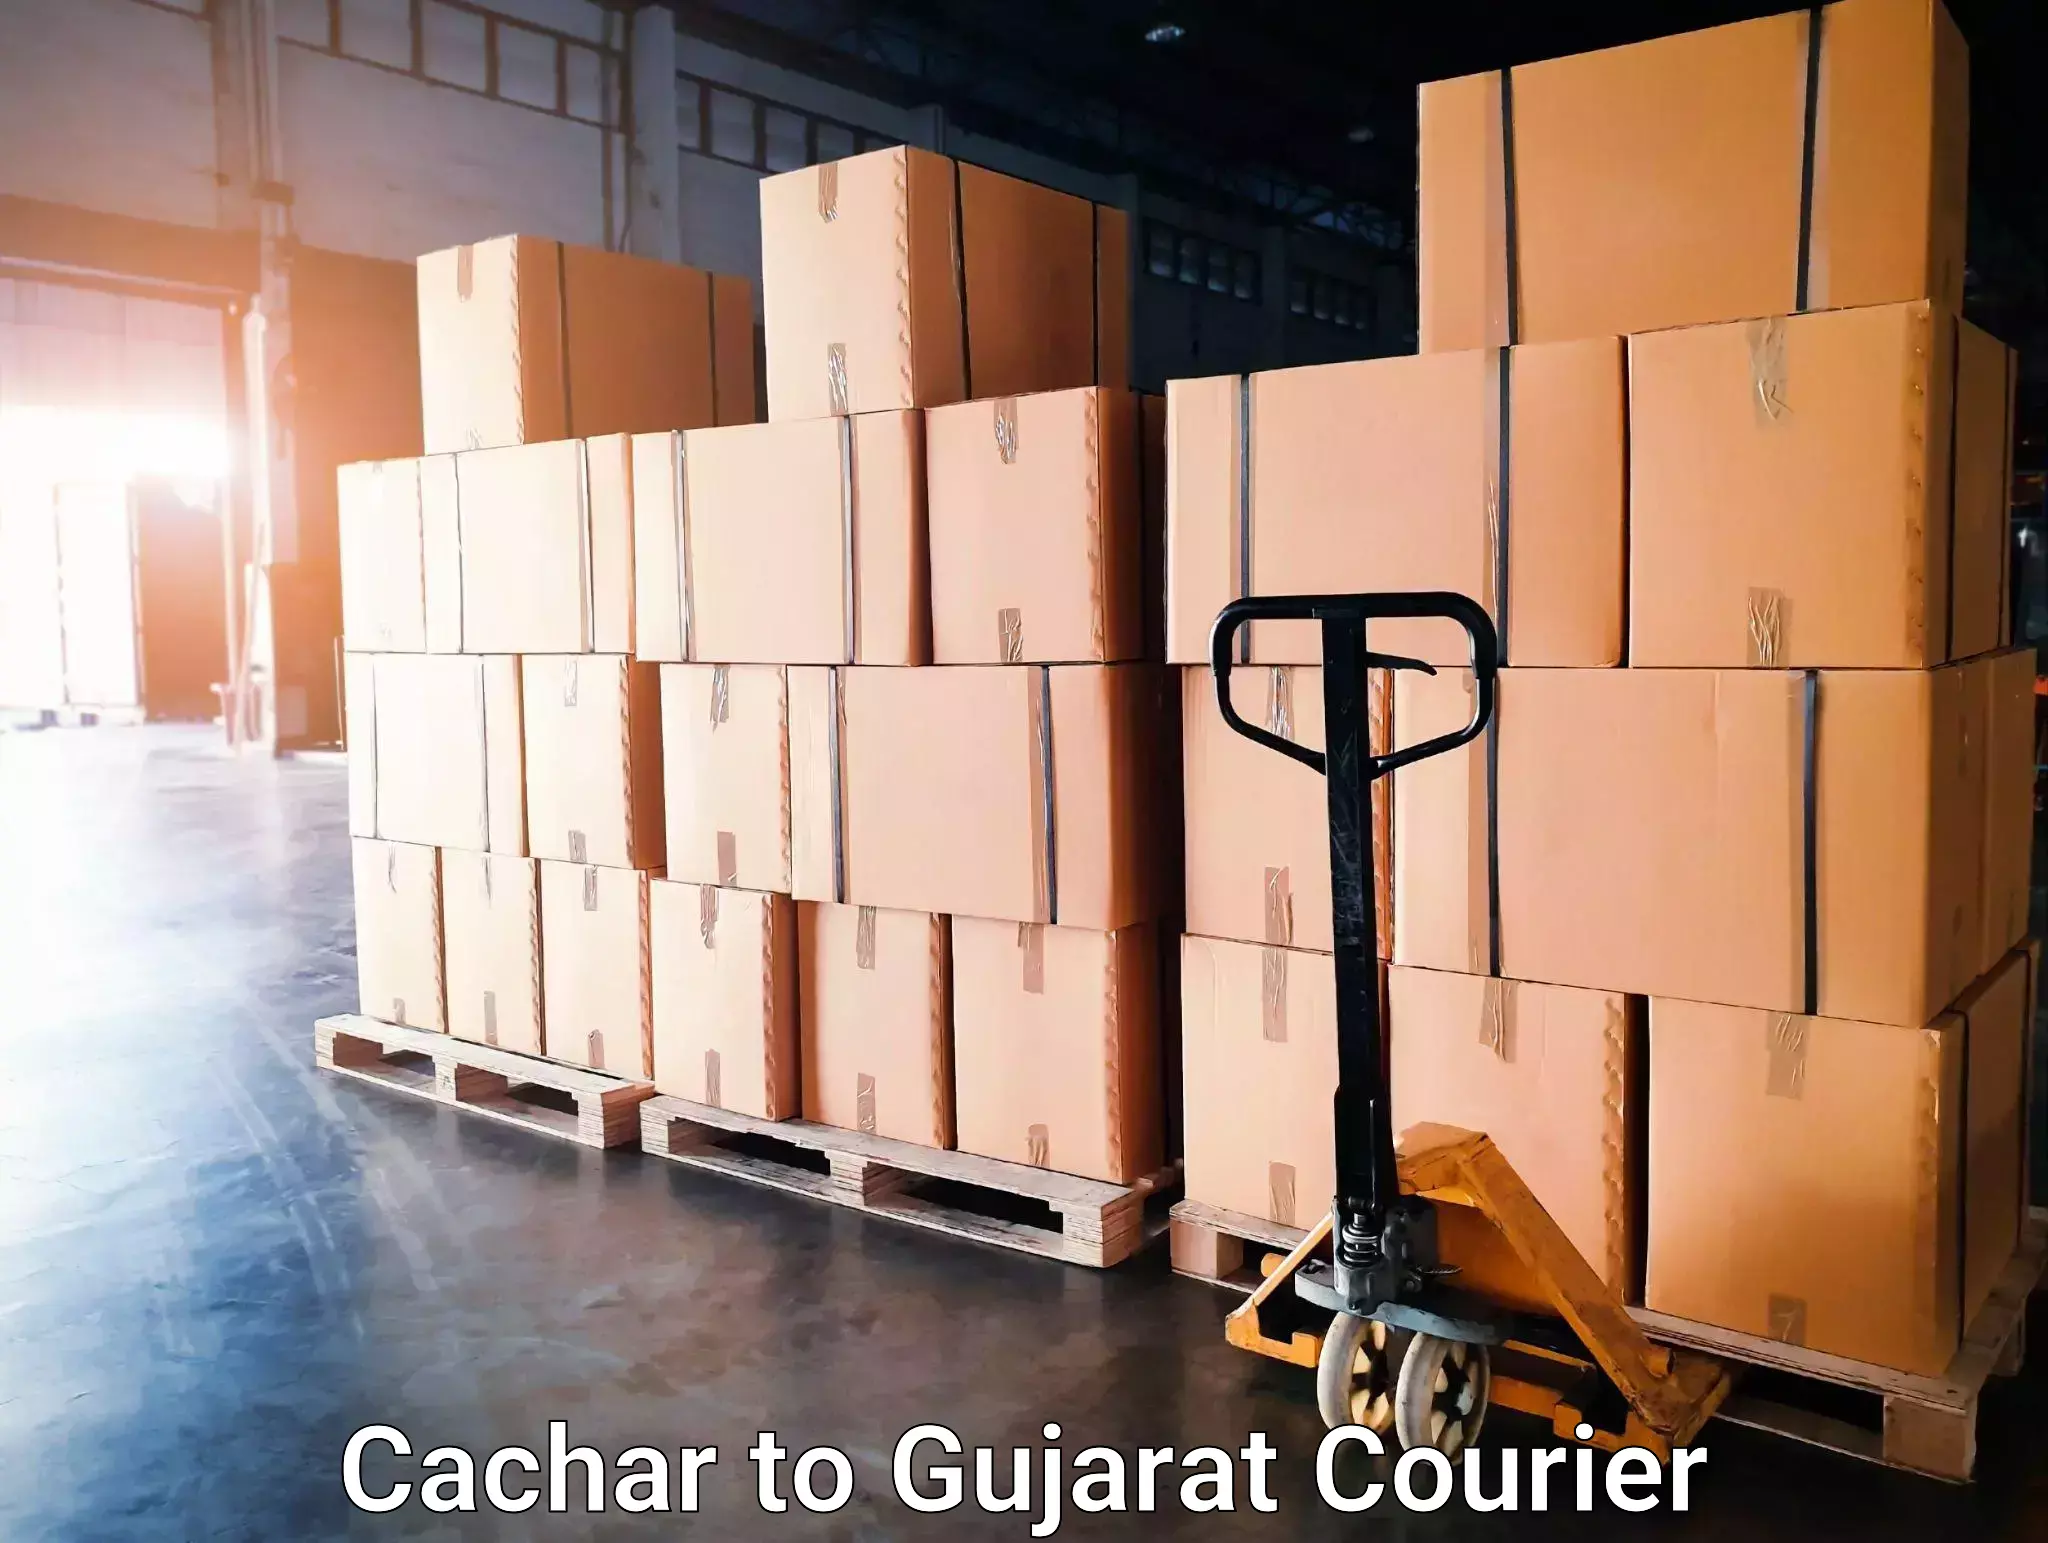 Expedited parcel delivery Cachar to GIDC